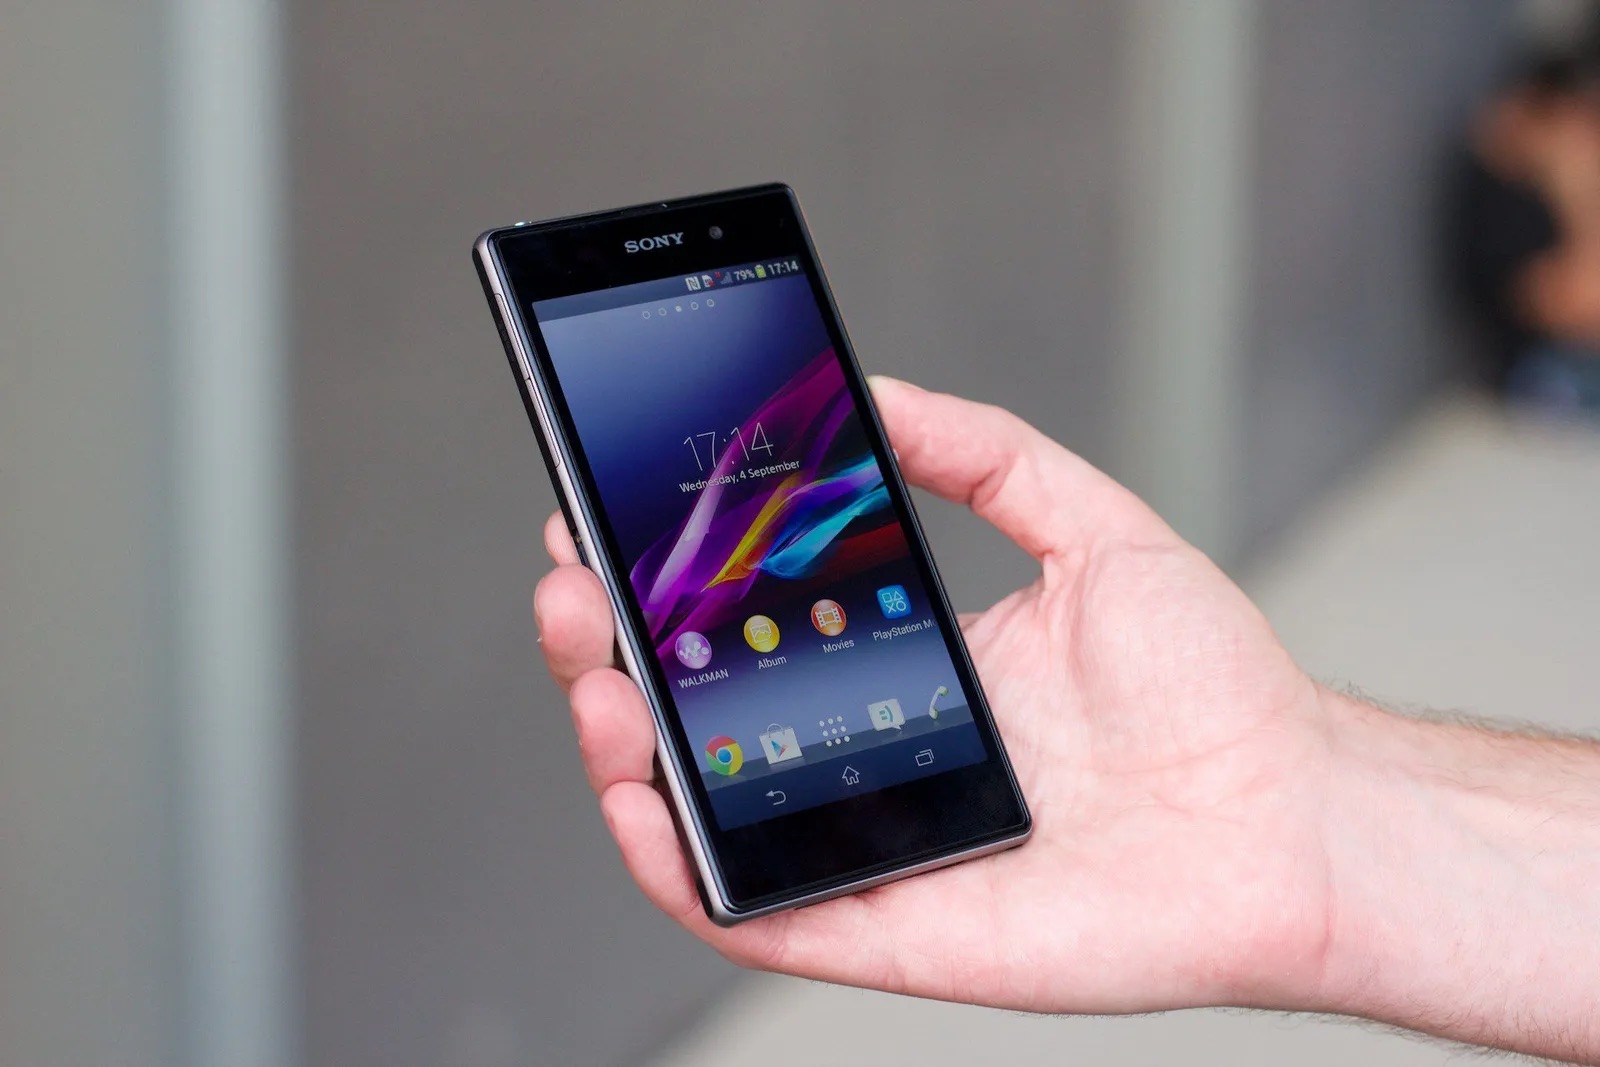 Release Date Of Sony Xperia Z1S